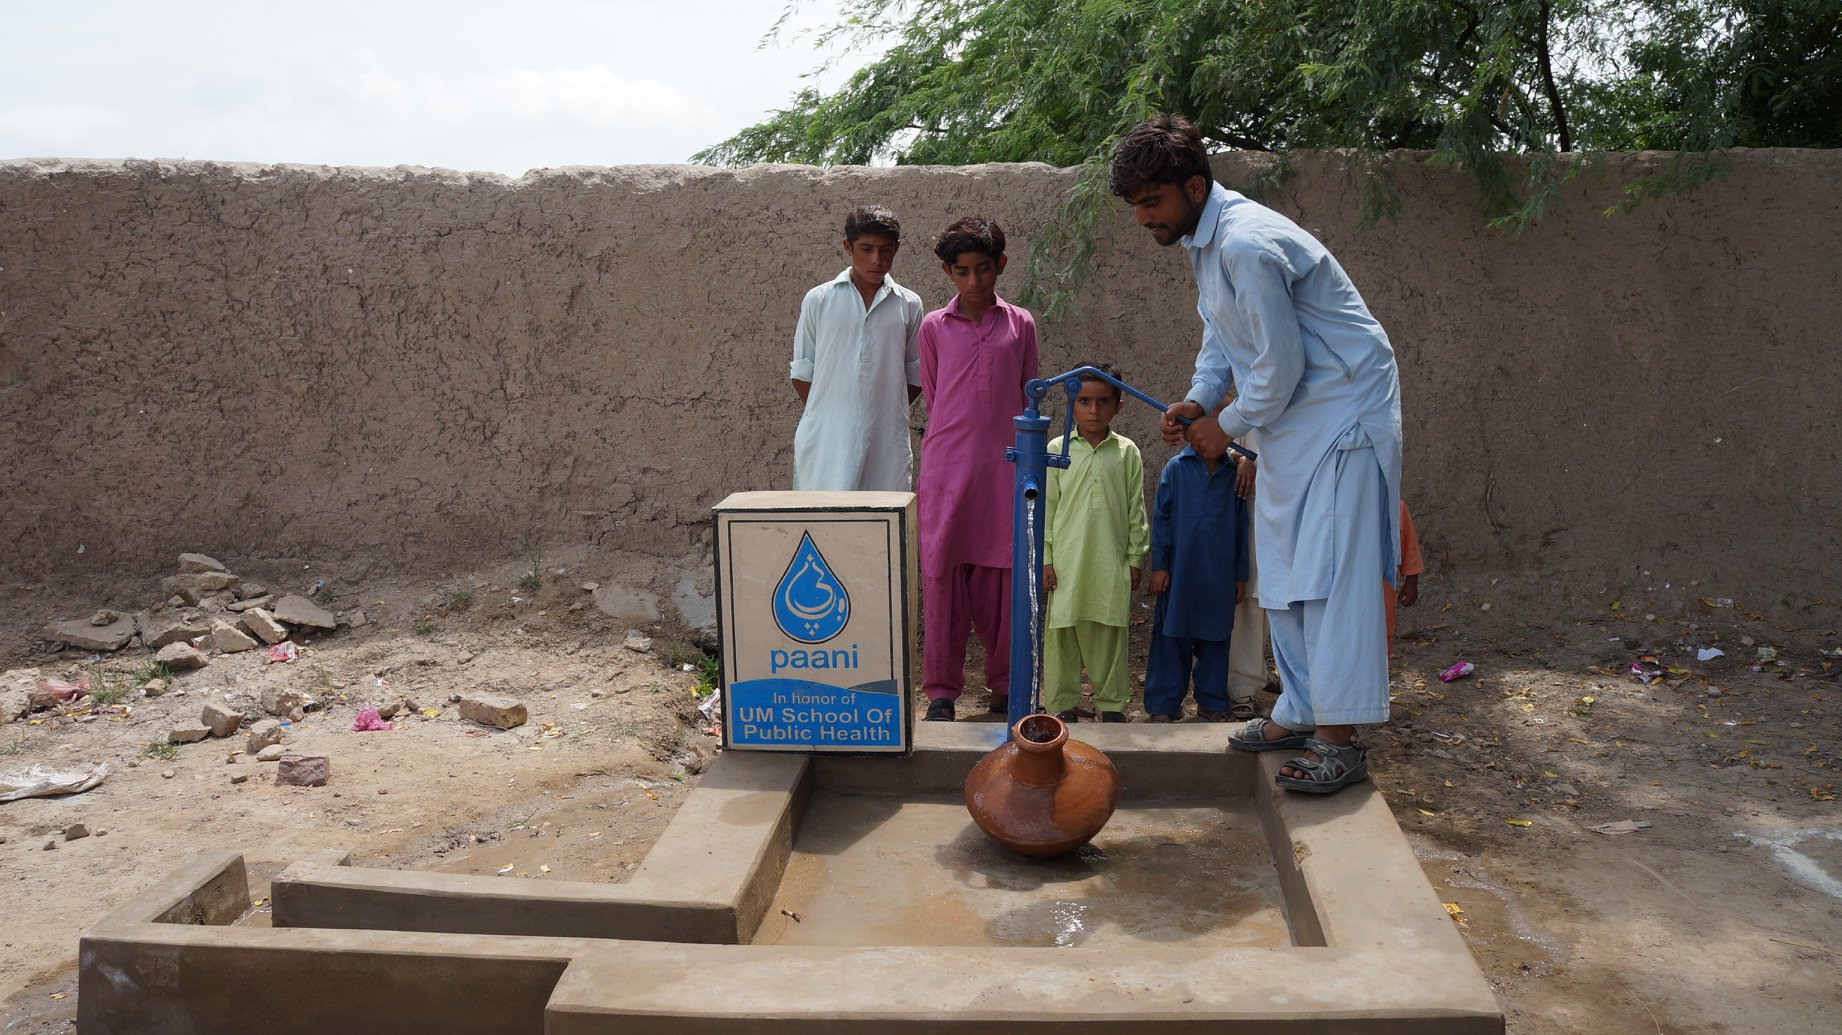 well being operated in rural Pakistan